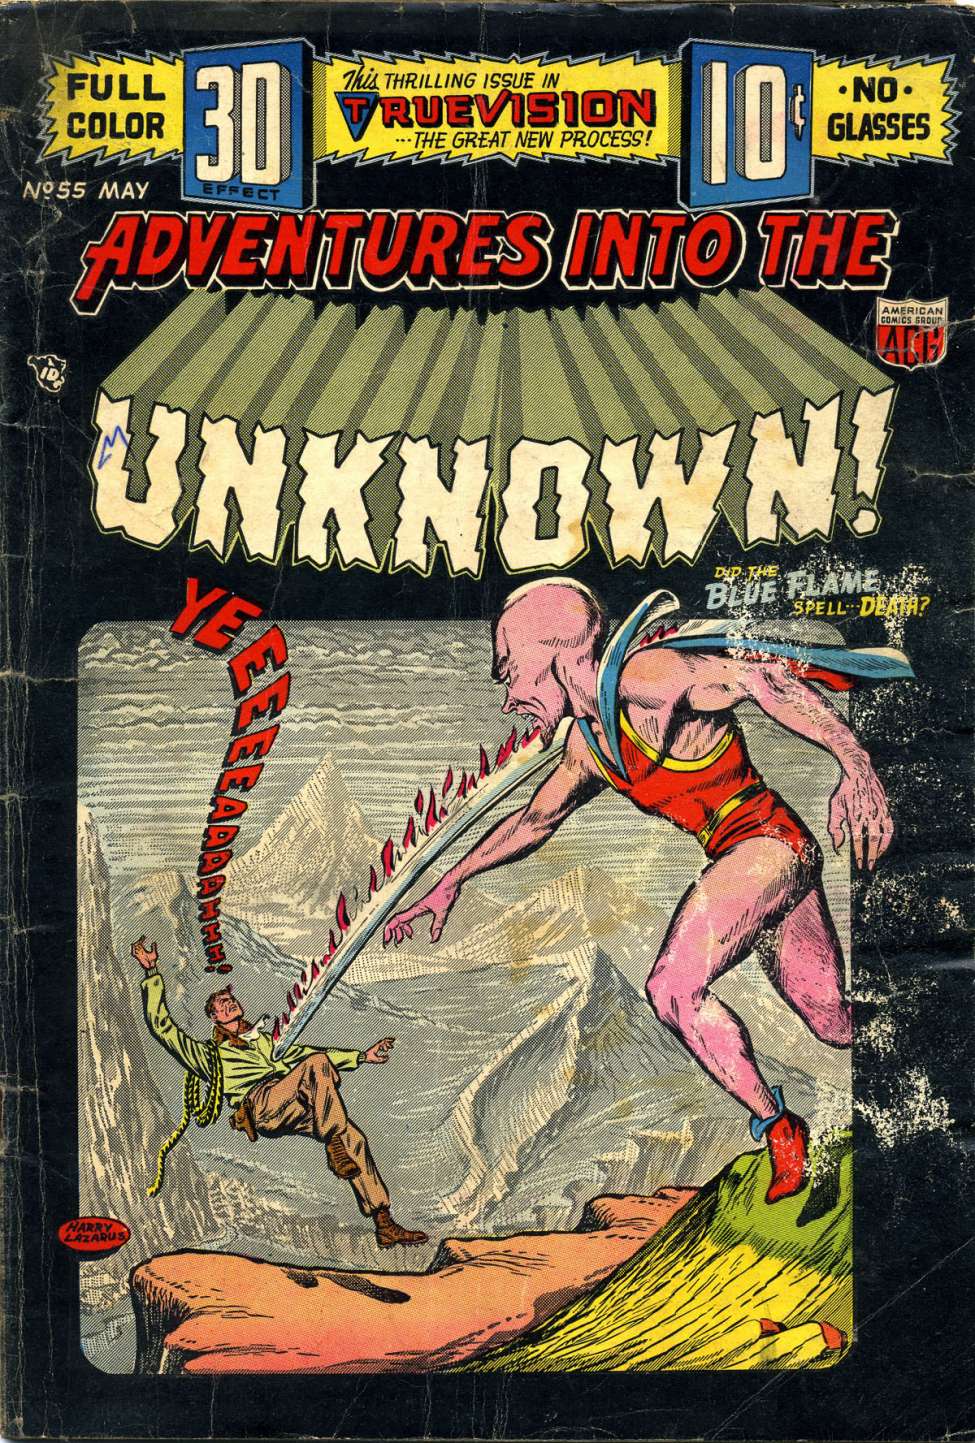 Book Cover For Adventures into the Unknown 55